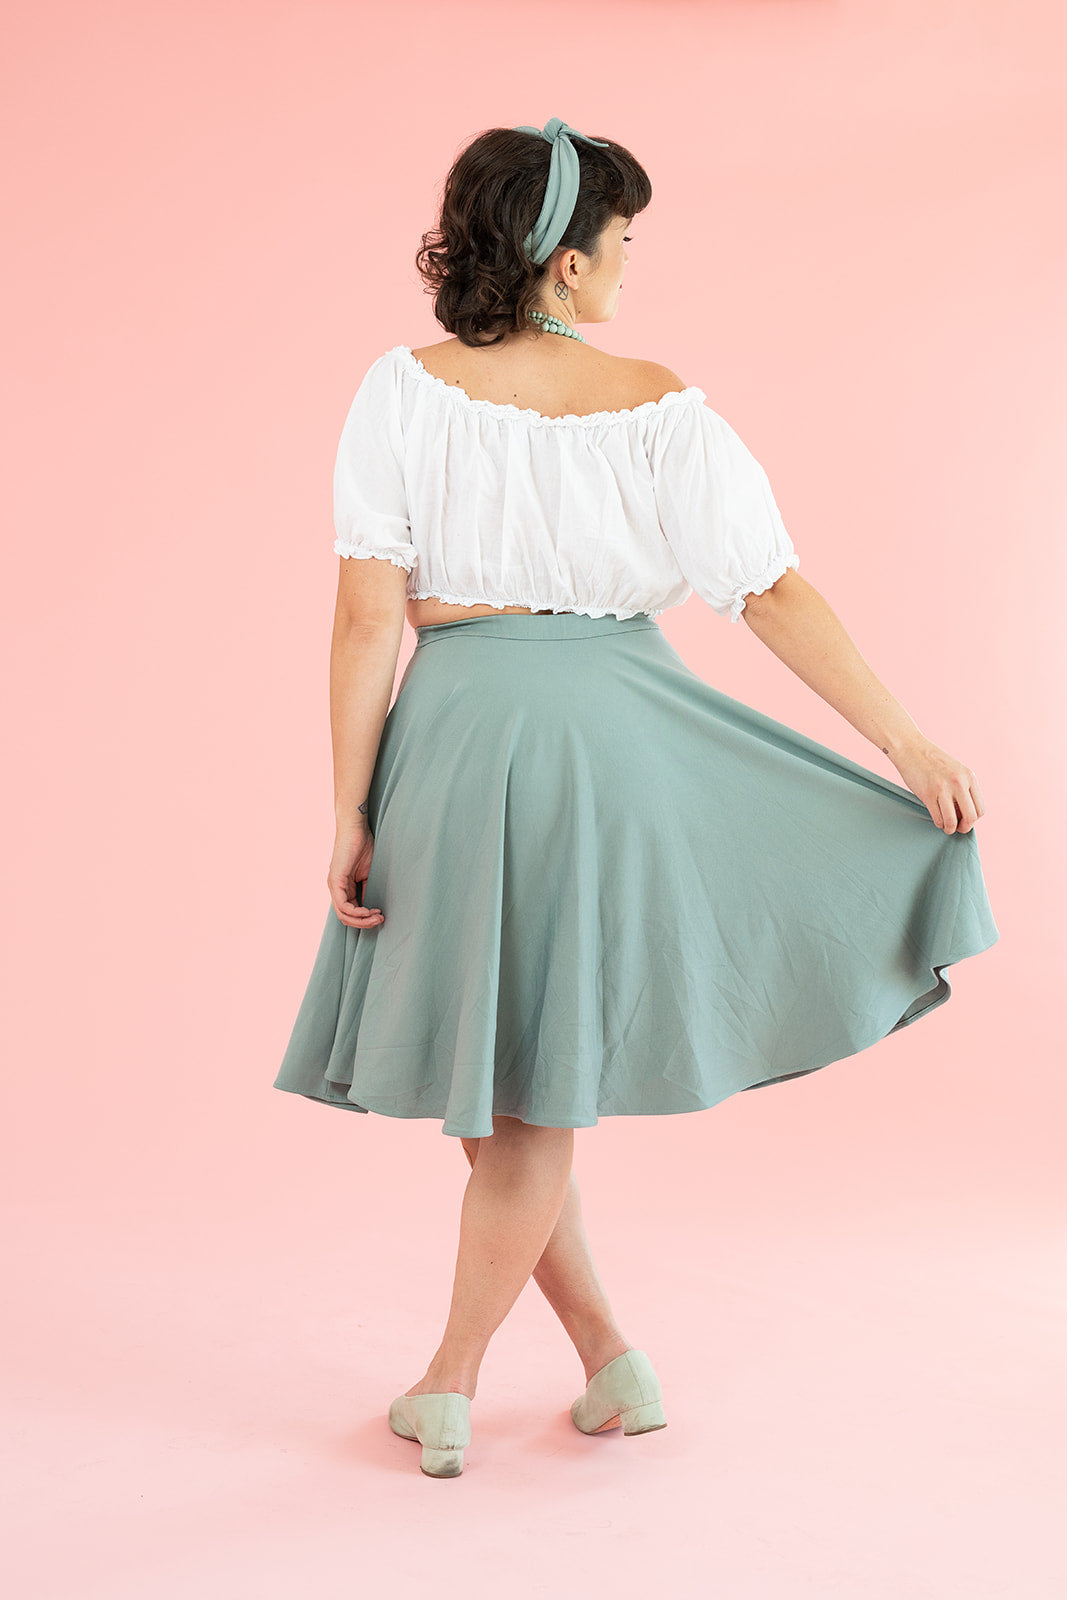 A young white woman with dark brown hair in a white top holds out the hem of a flowy vintage-inspired mint skirt.